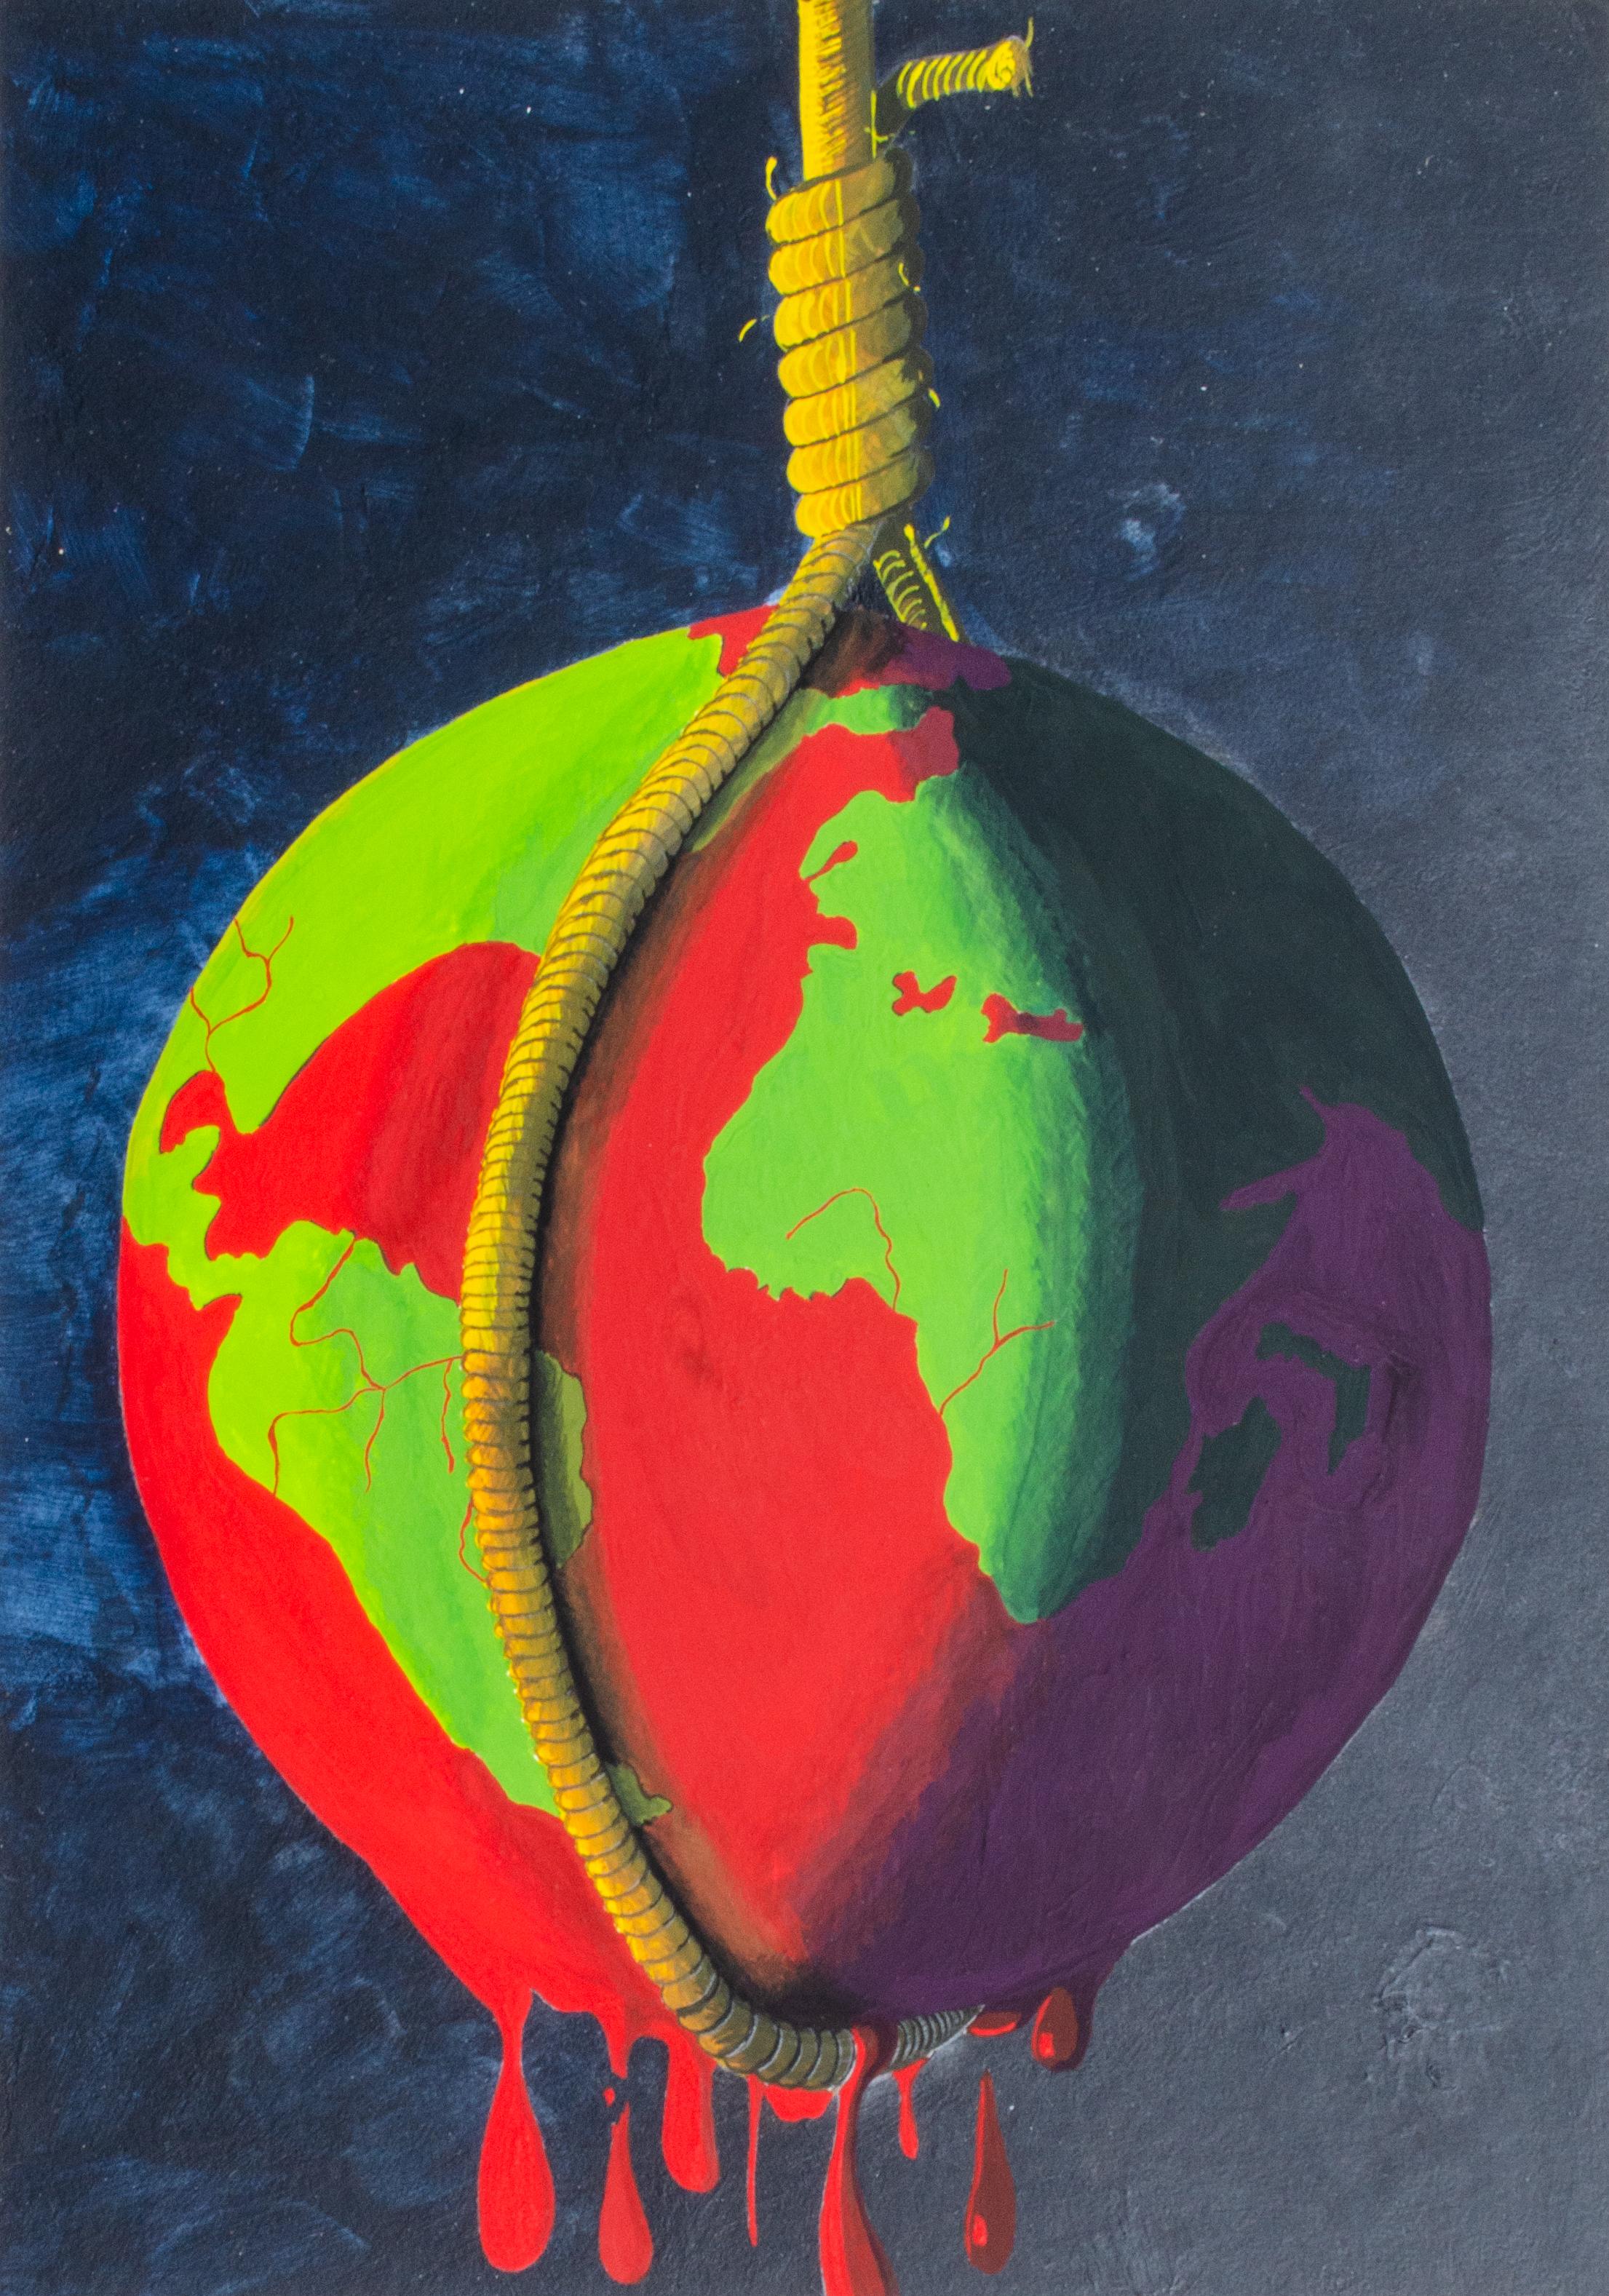 Bernard Nacion
Untitled (World on a String), Late 20th Century
Acrylic on paper
15 x 10 in.

Bernard Nacion is a creative whose imaginative compositions take many different shapes. He guest starred on the Los Angeles Public-access television show